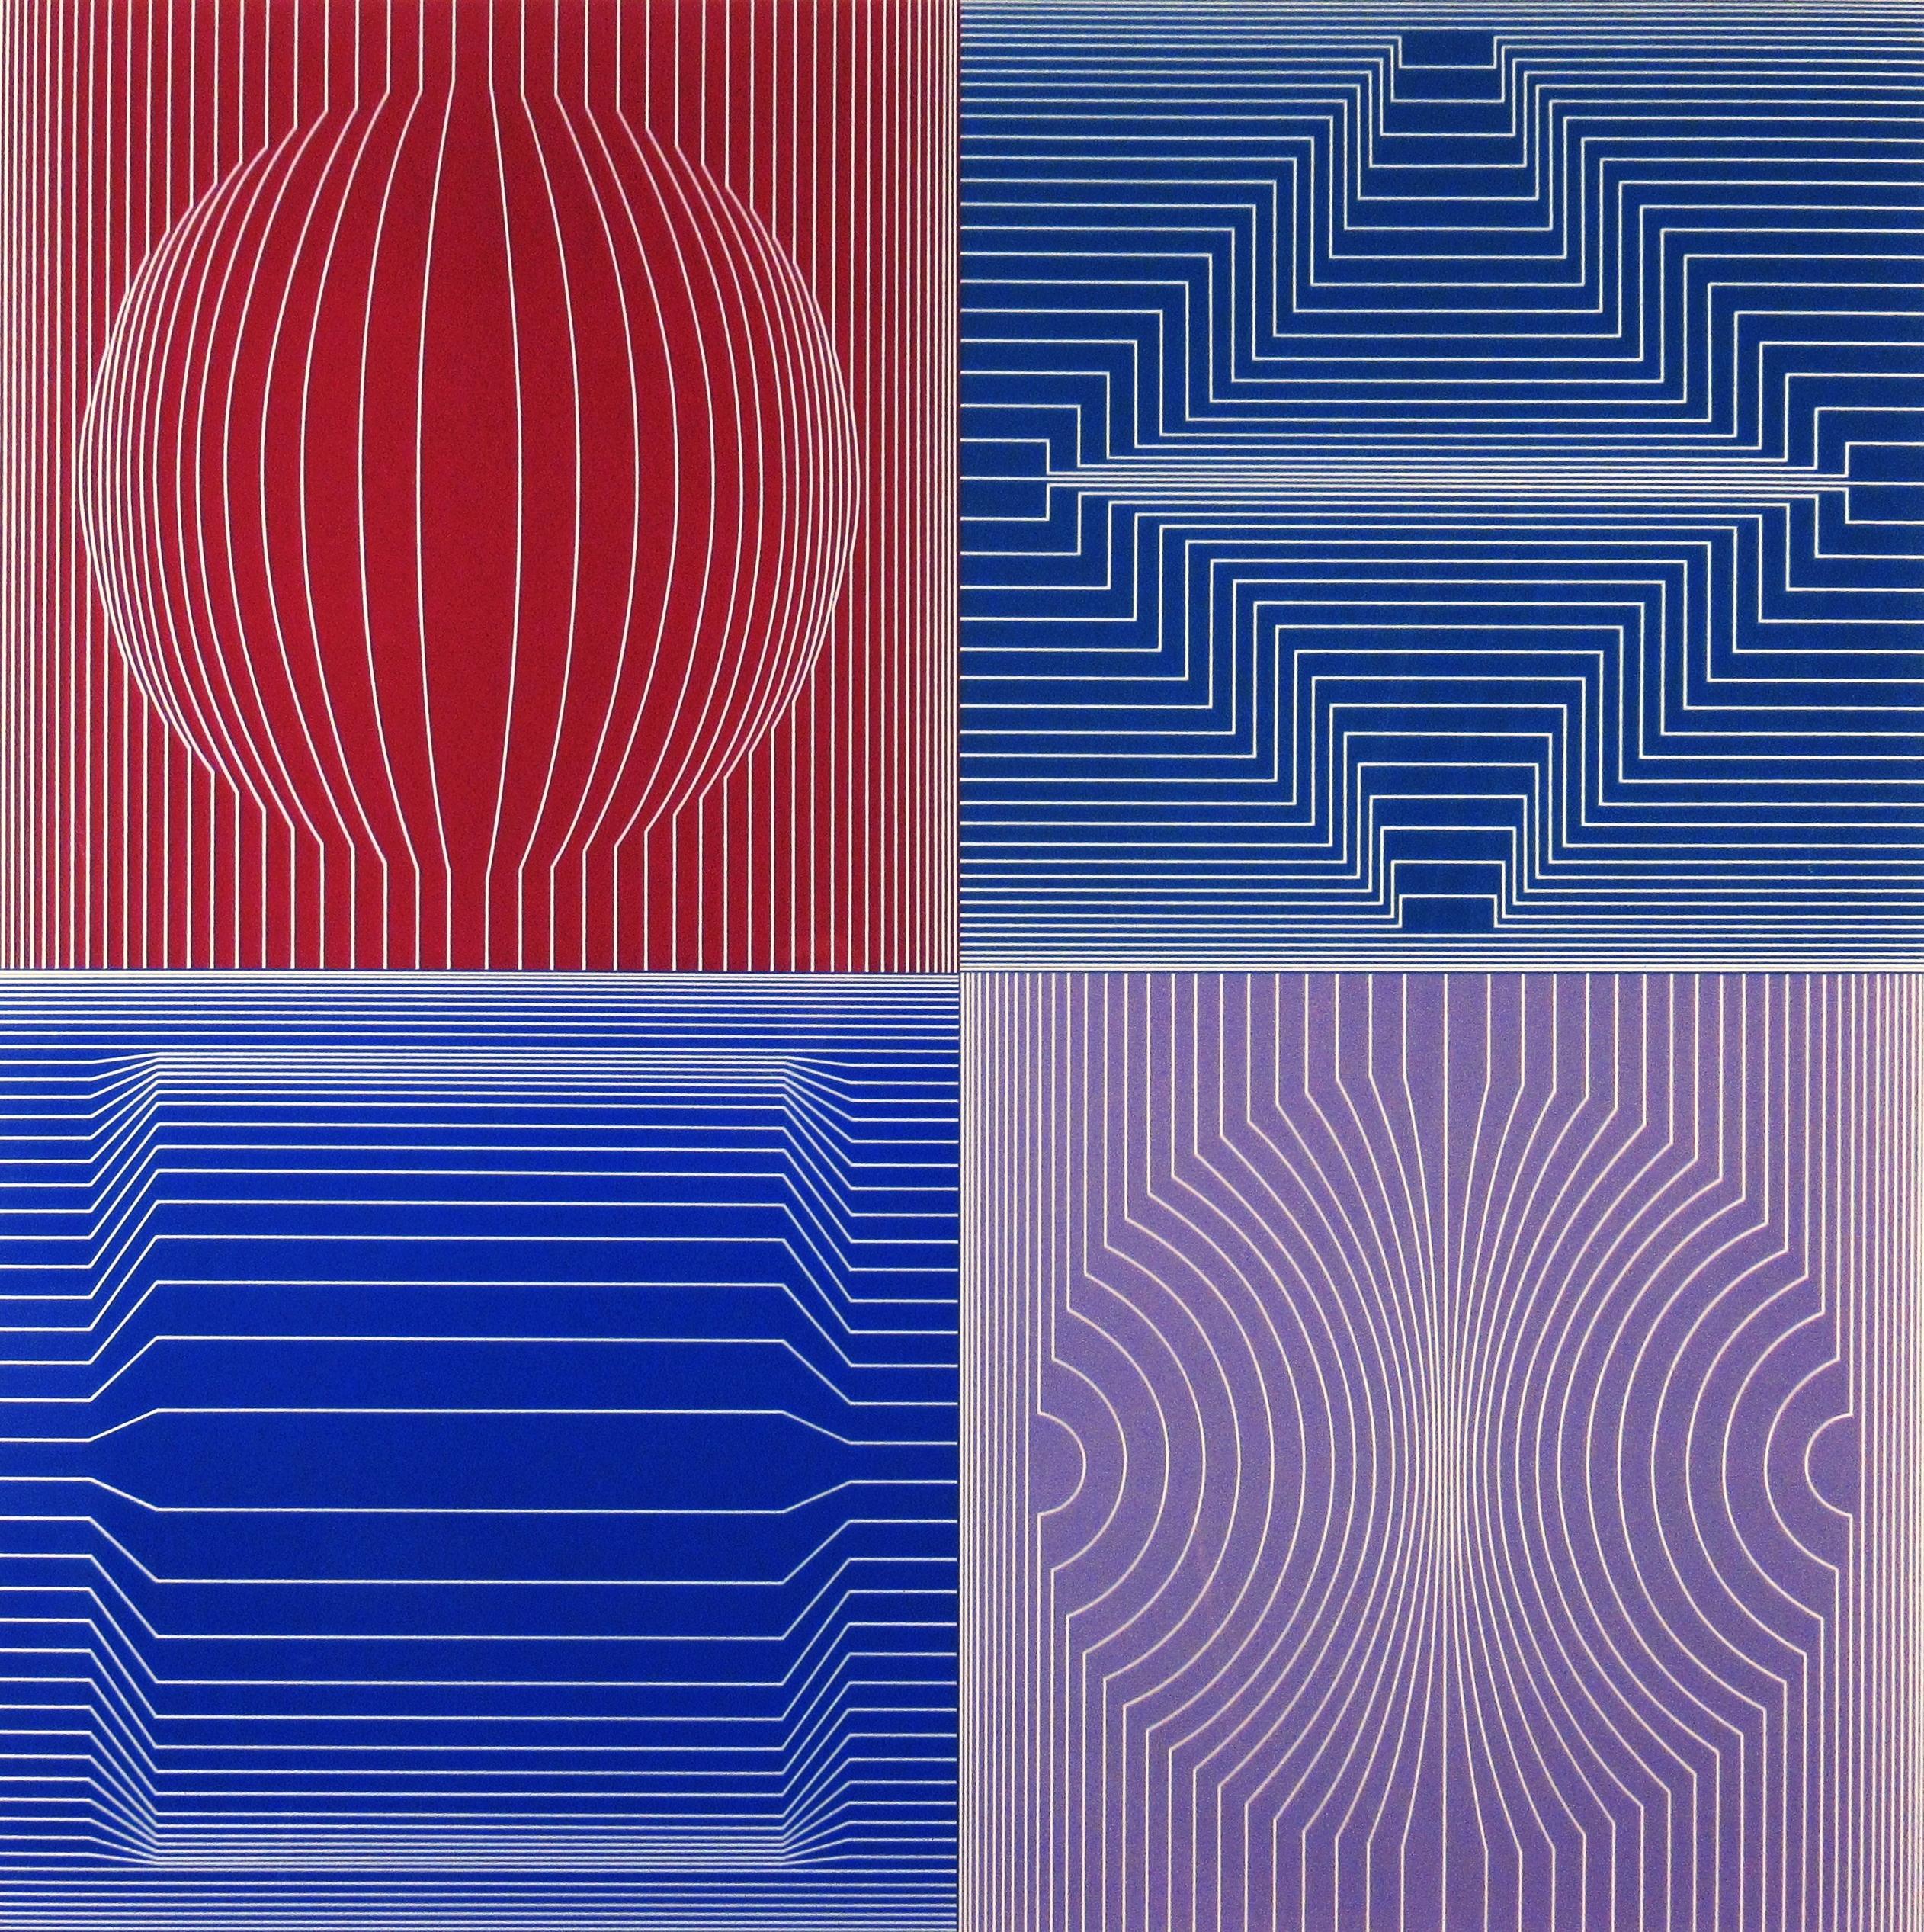 Tokyo - Print by Victor Vasarely